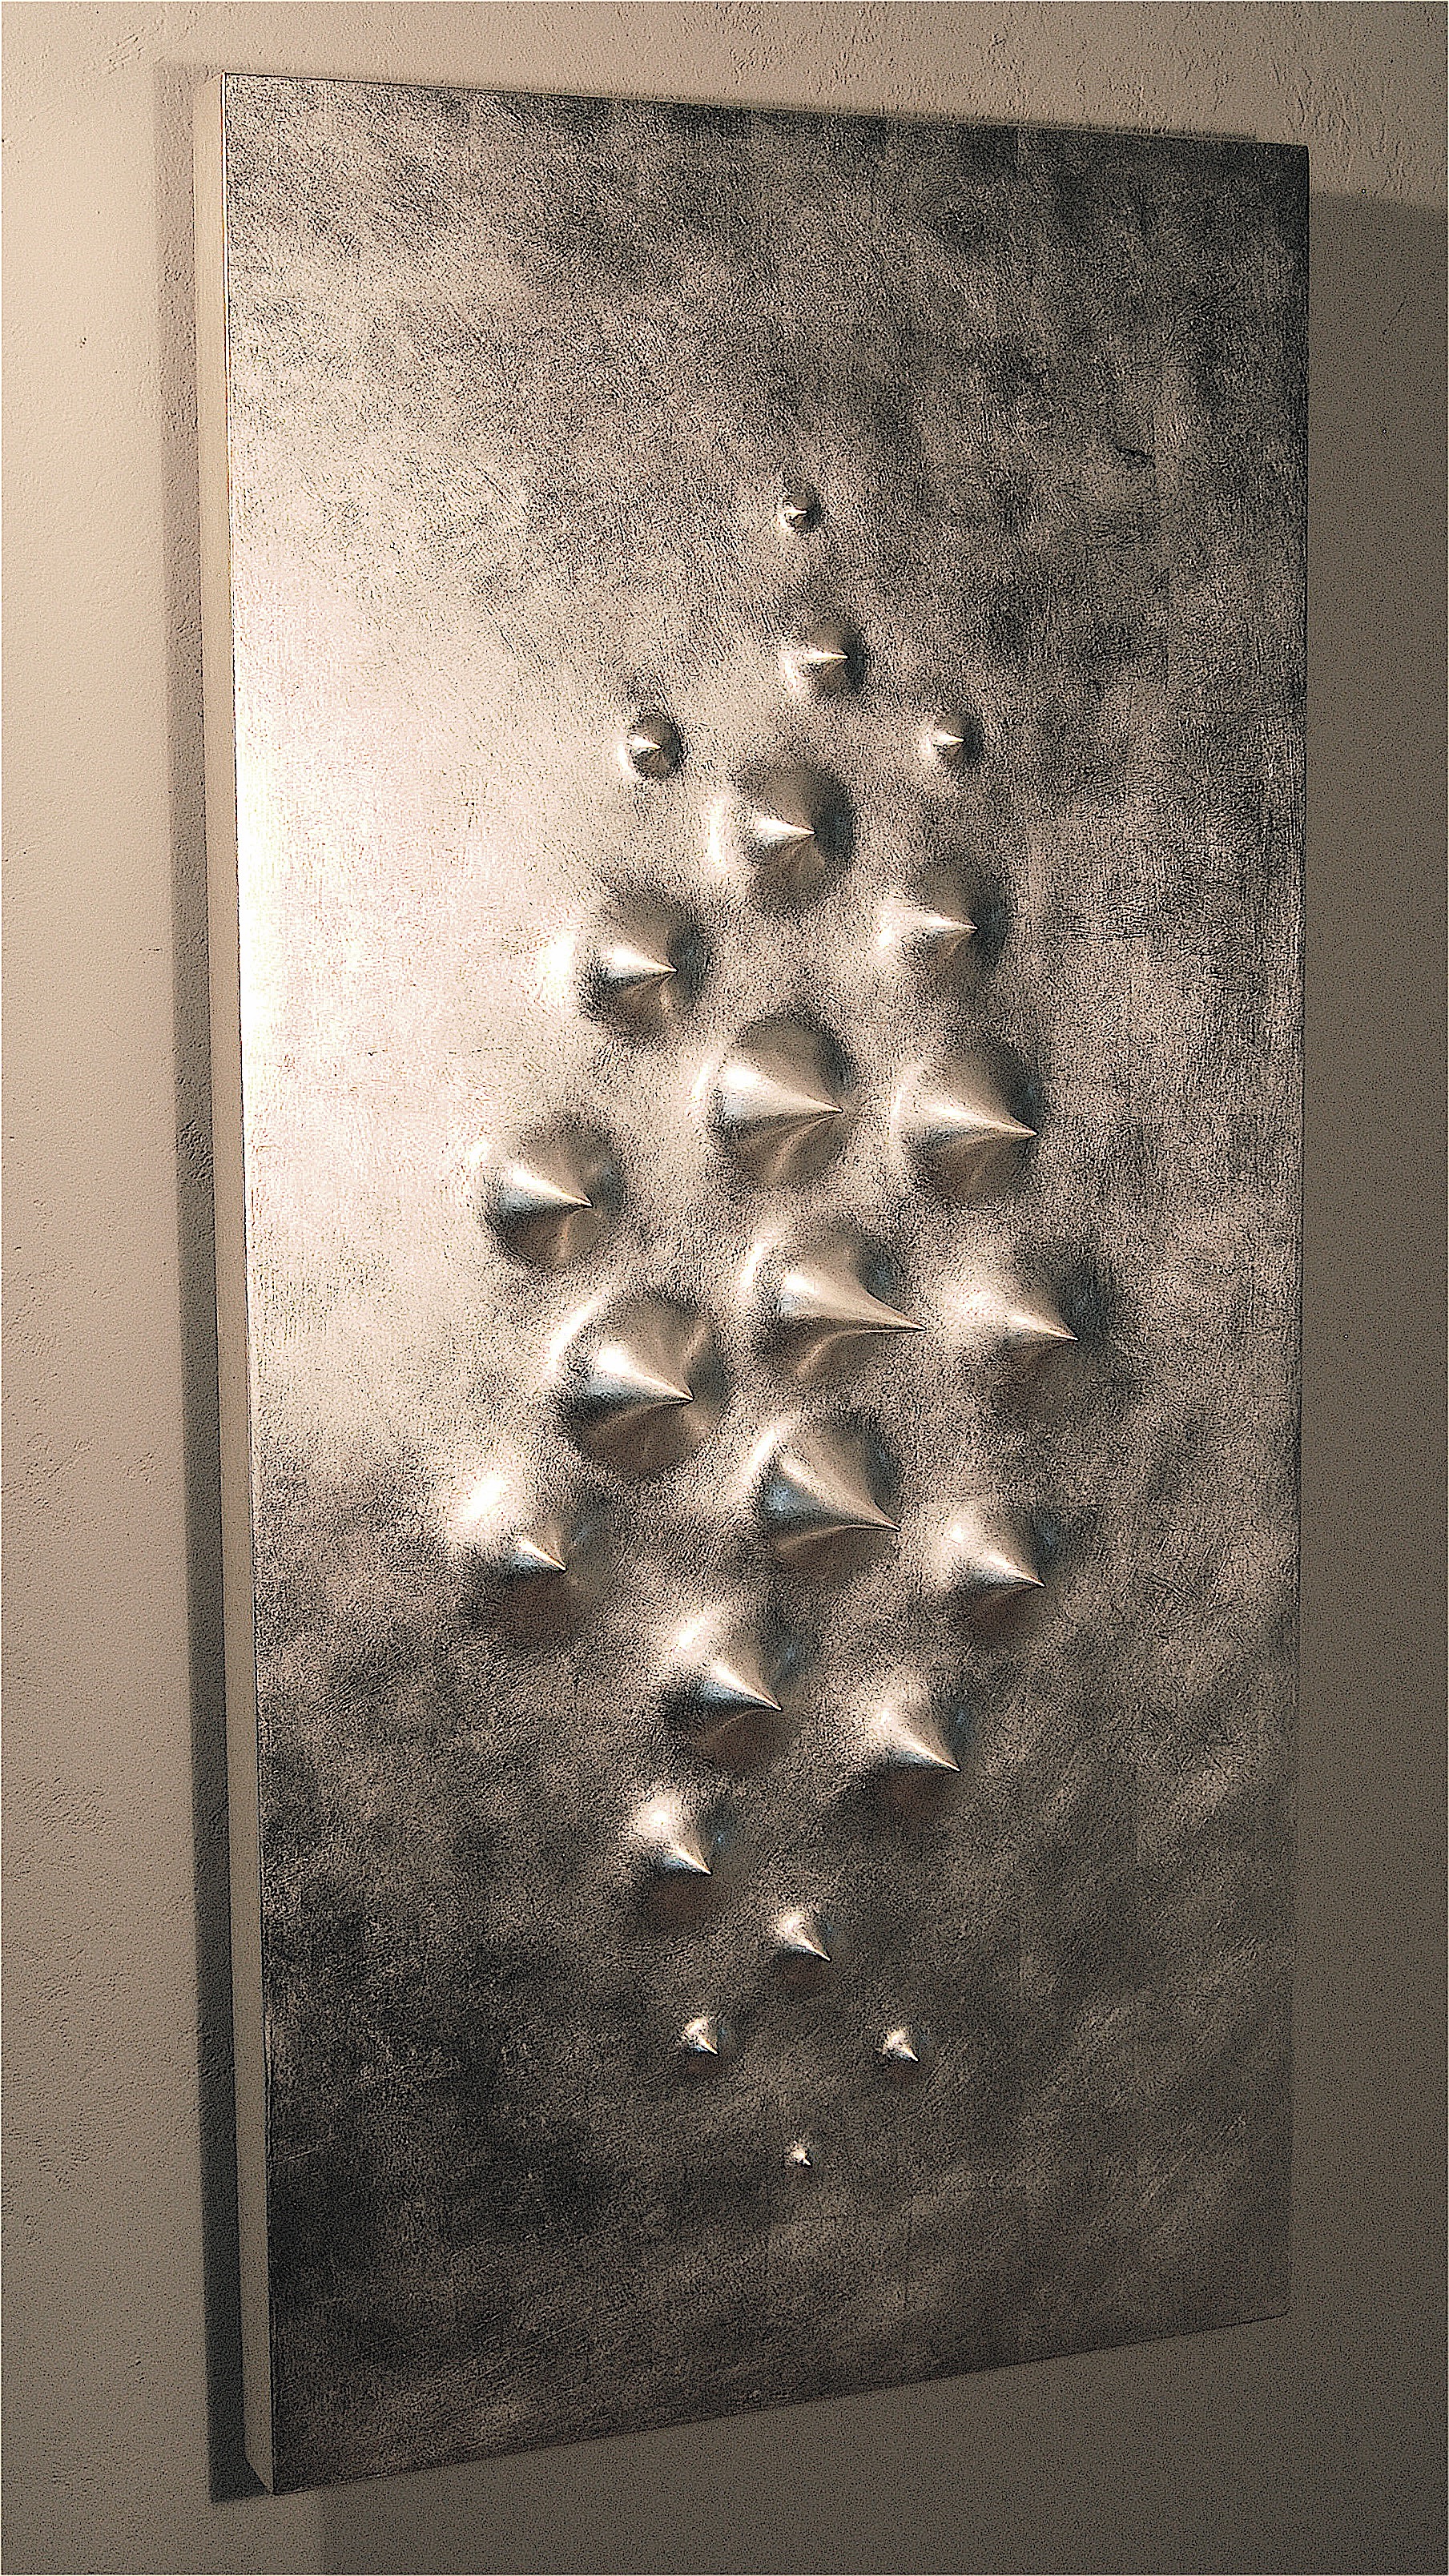 Thomas Coffin - Spikes (14 kt. white gold leaf), 48"h x 24"w x 2"d, mixed media sculptural wall relief